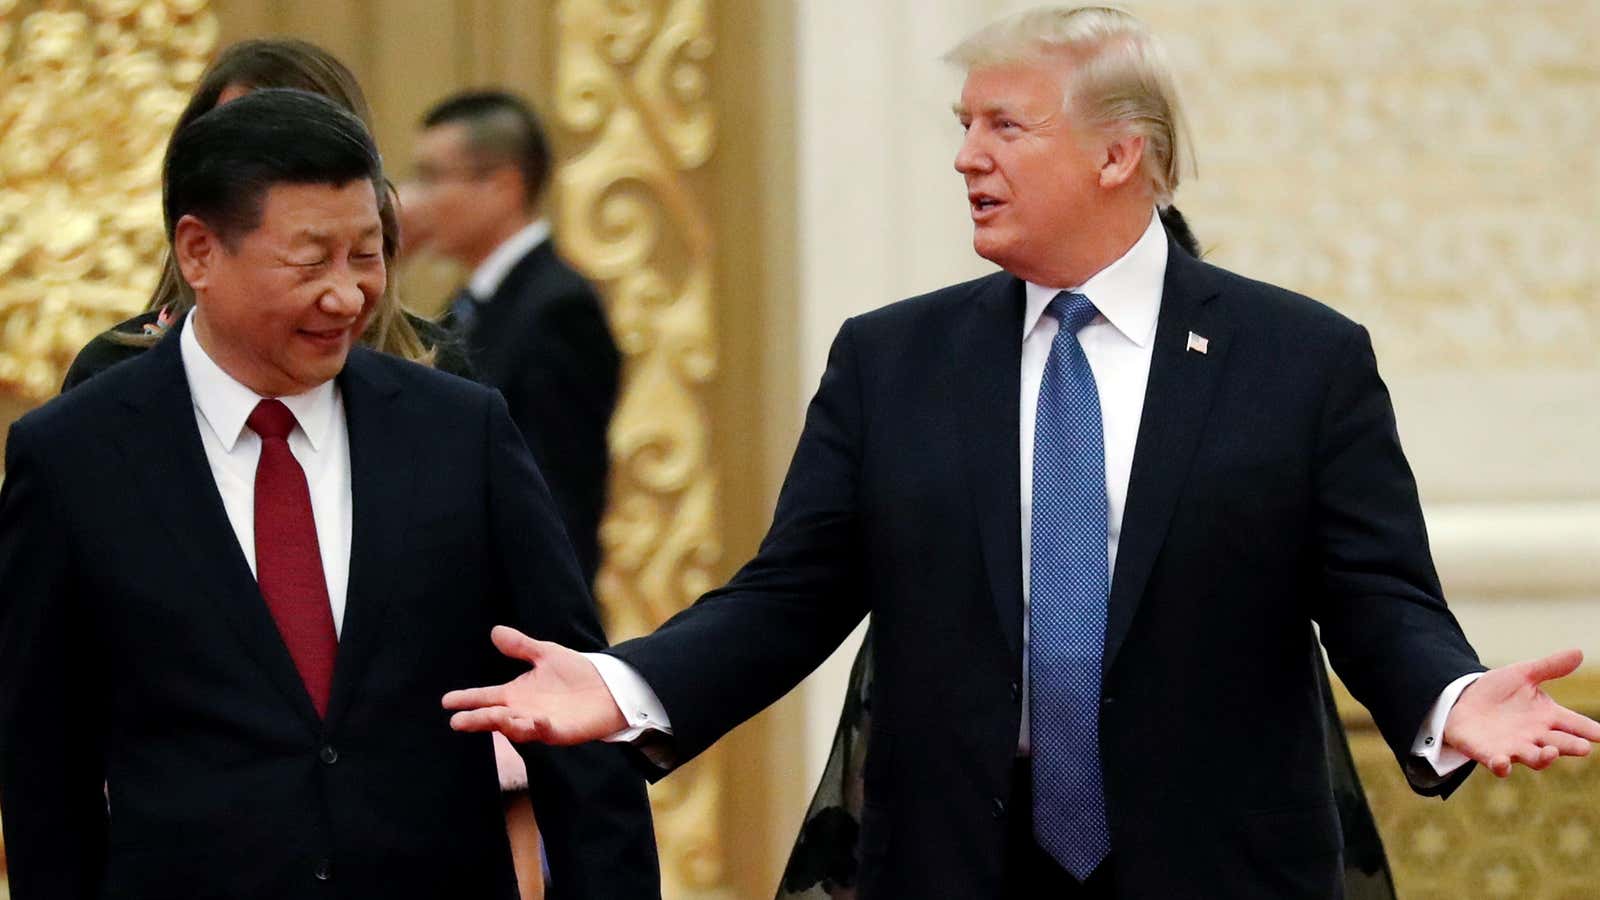 Xi and Trump, in happier times.